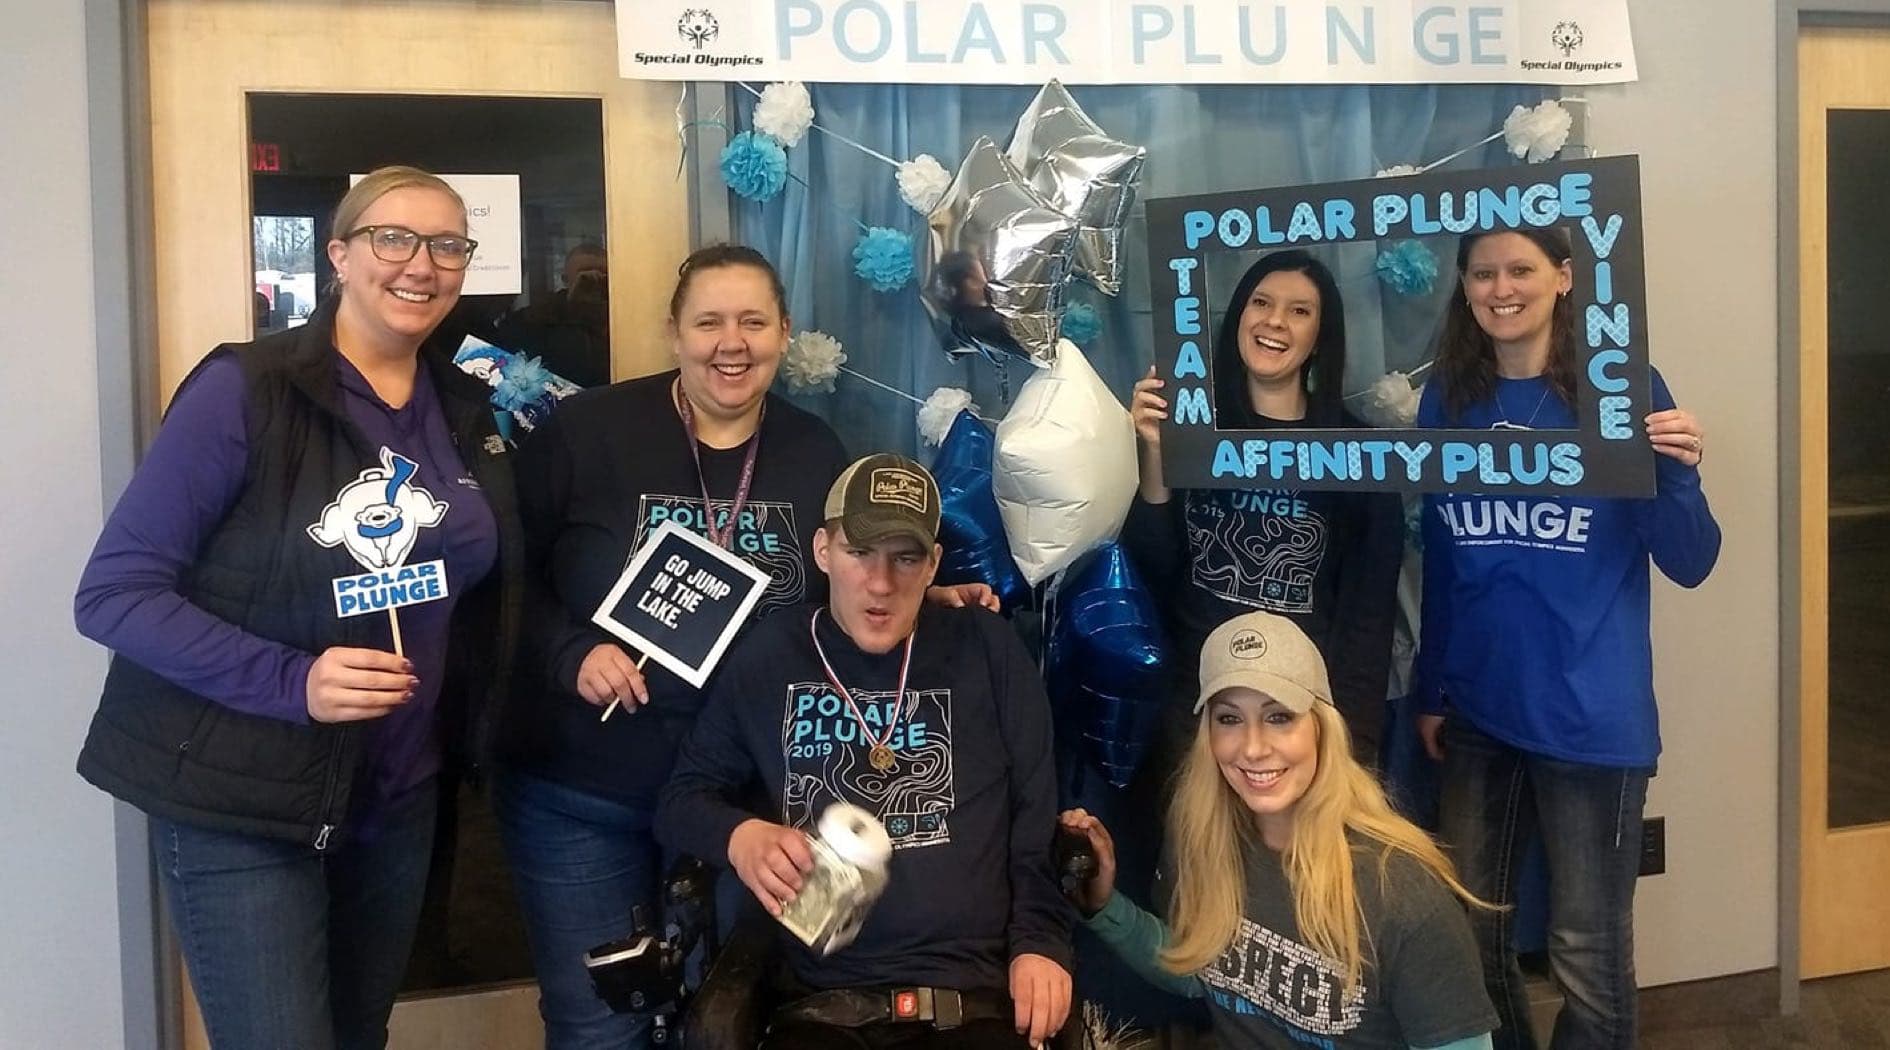 A group of Affinity Plus employees wearing Polar Plunge T-shirts